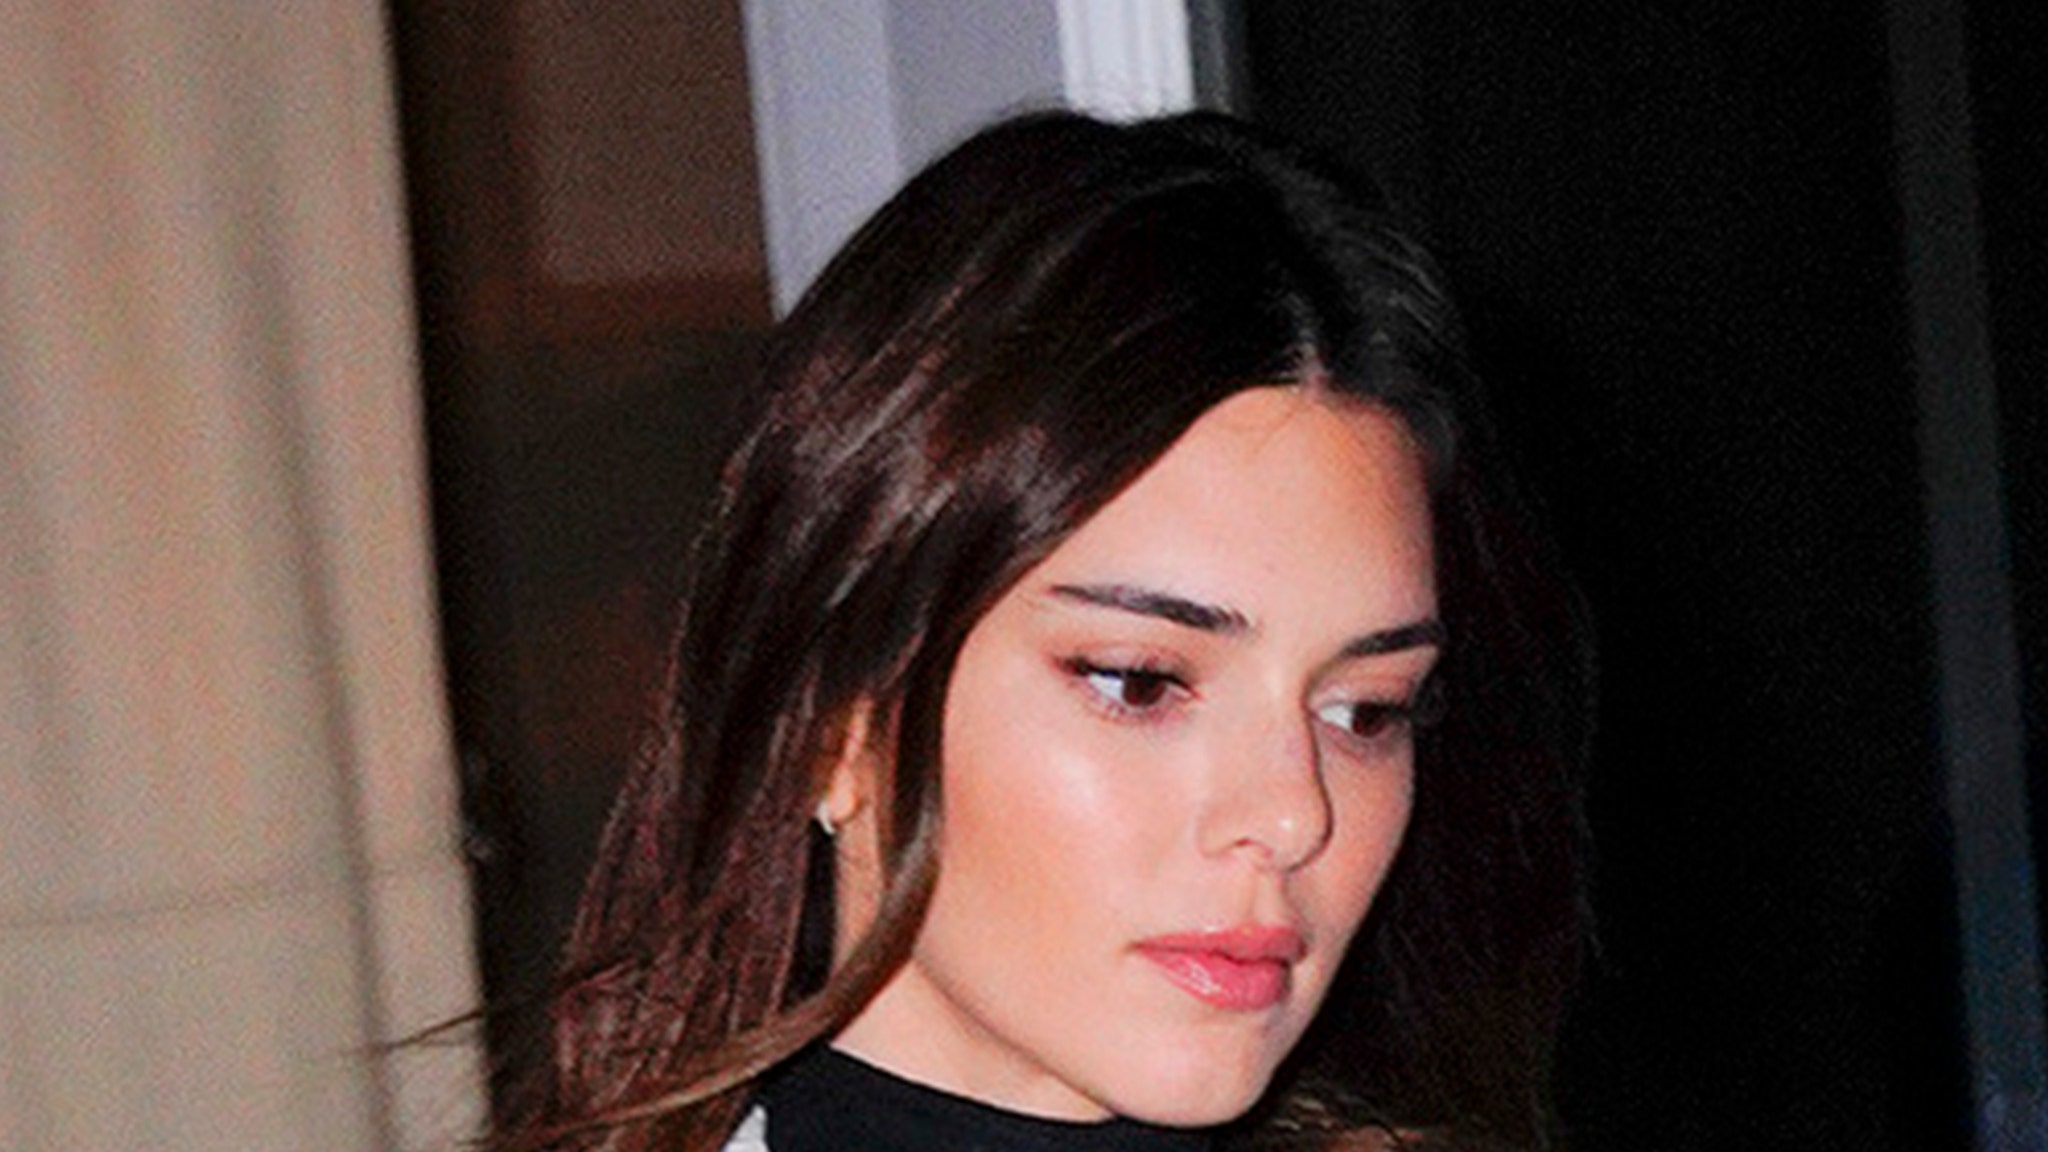 Kendall Jenner Leaves Home After Death Threat and Intrusion - TMZ